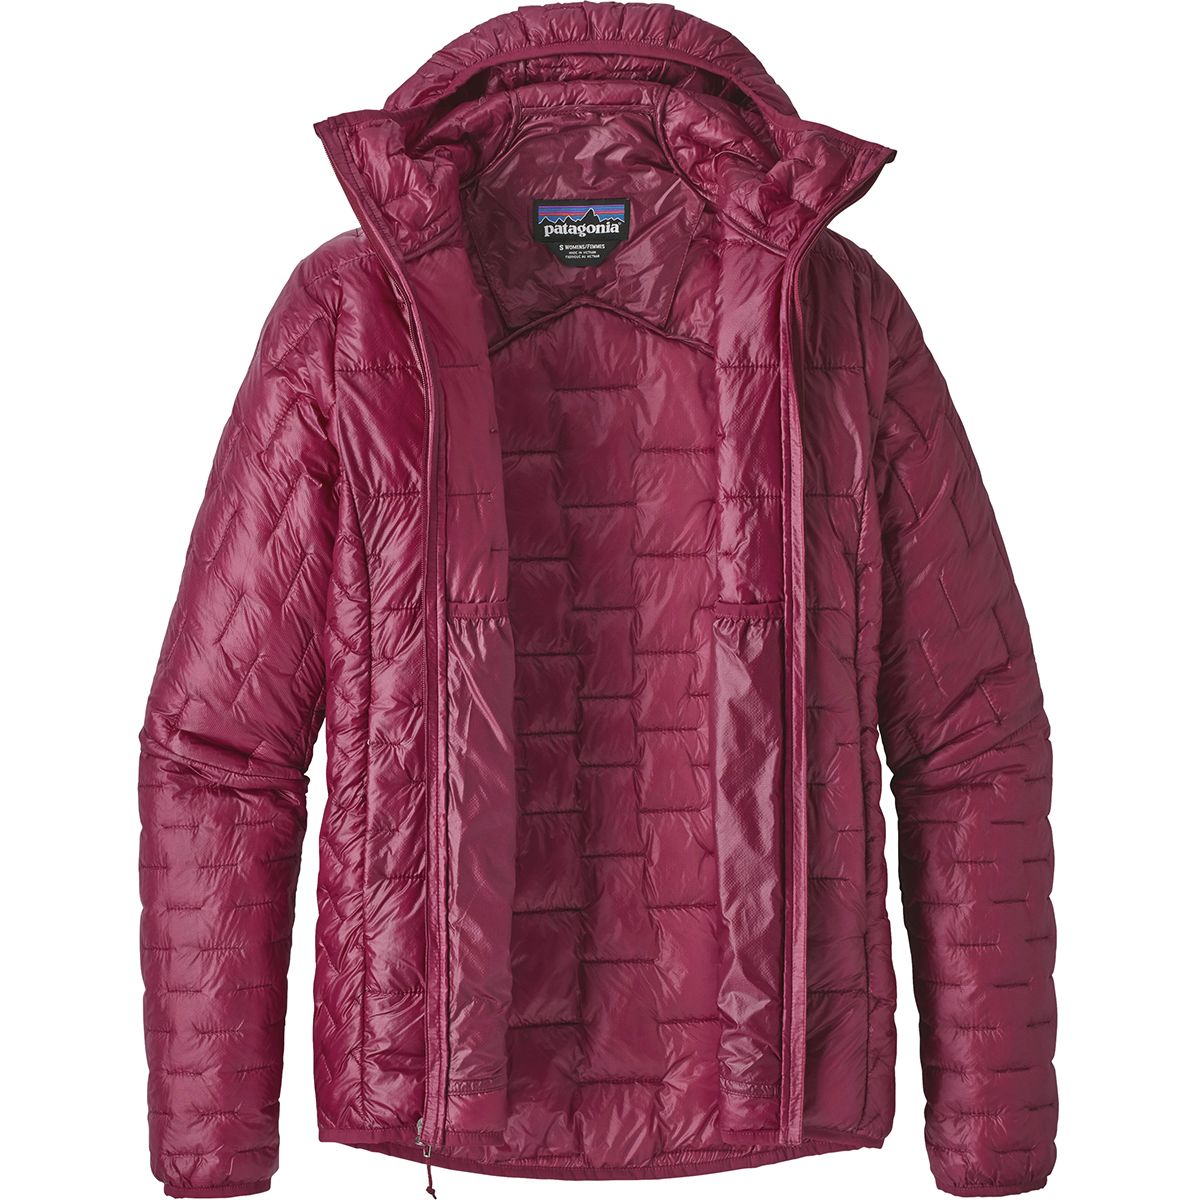 Details about   NWT Flylow Tamara Micro Puff Jacket Women's Small Hooded Pink/Black Ski